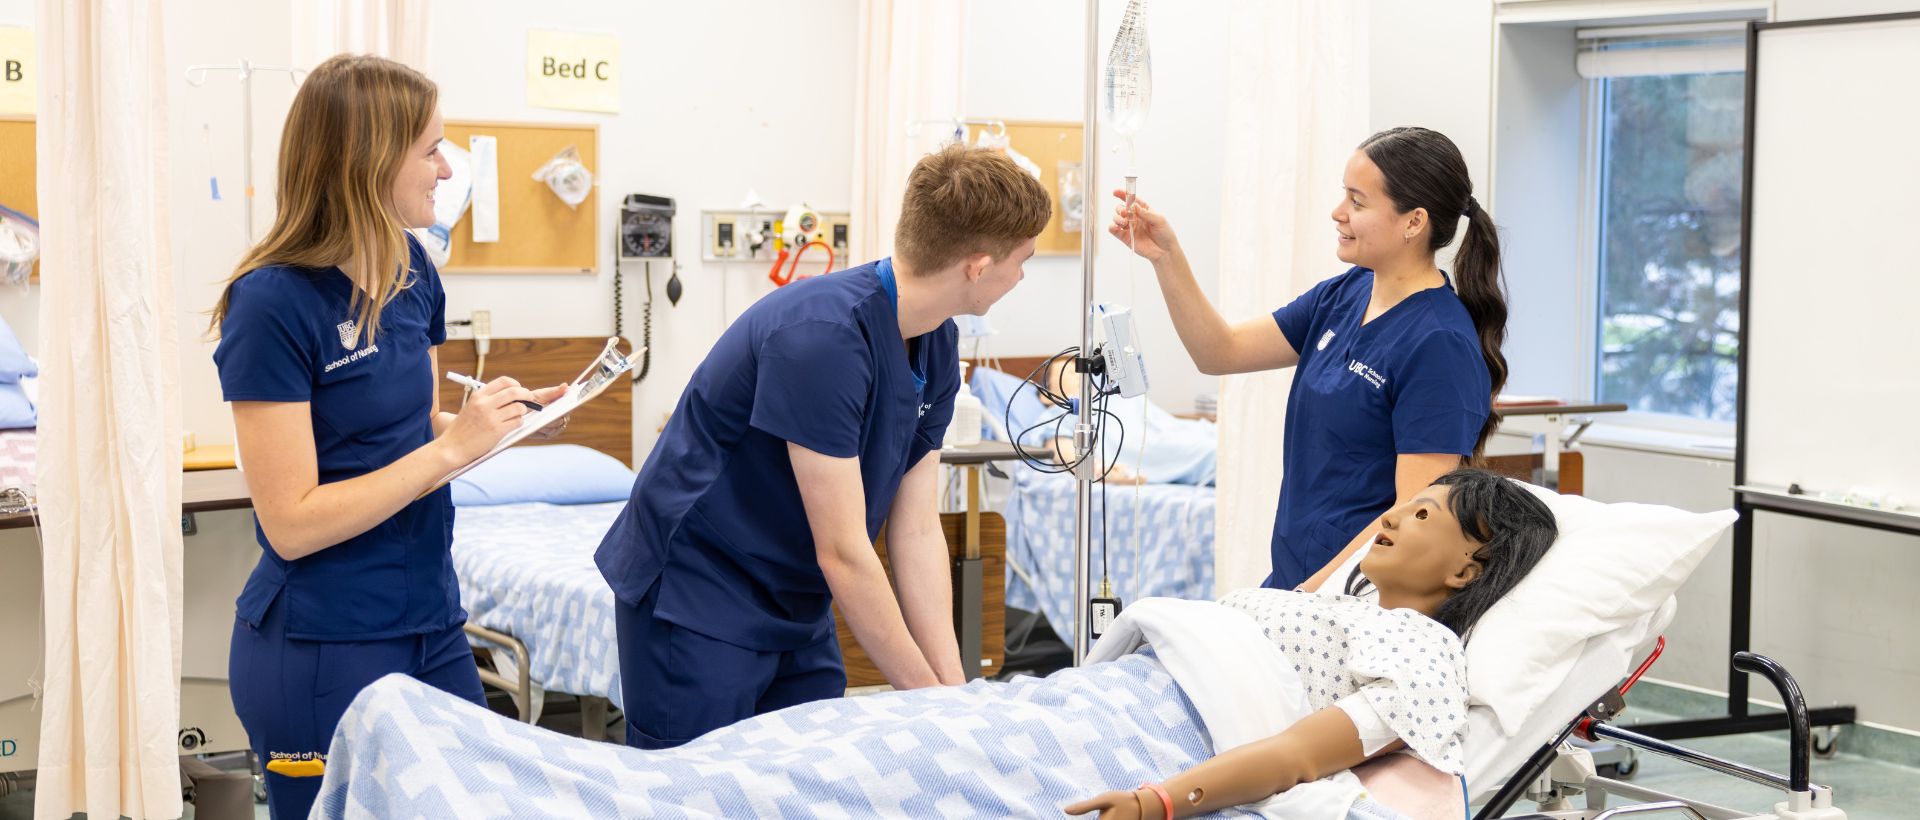 Nursing students working with simulation patient